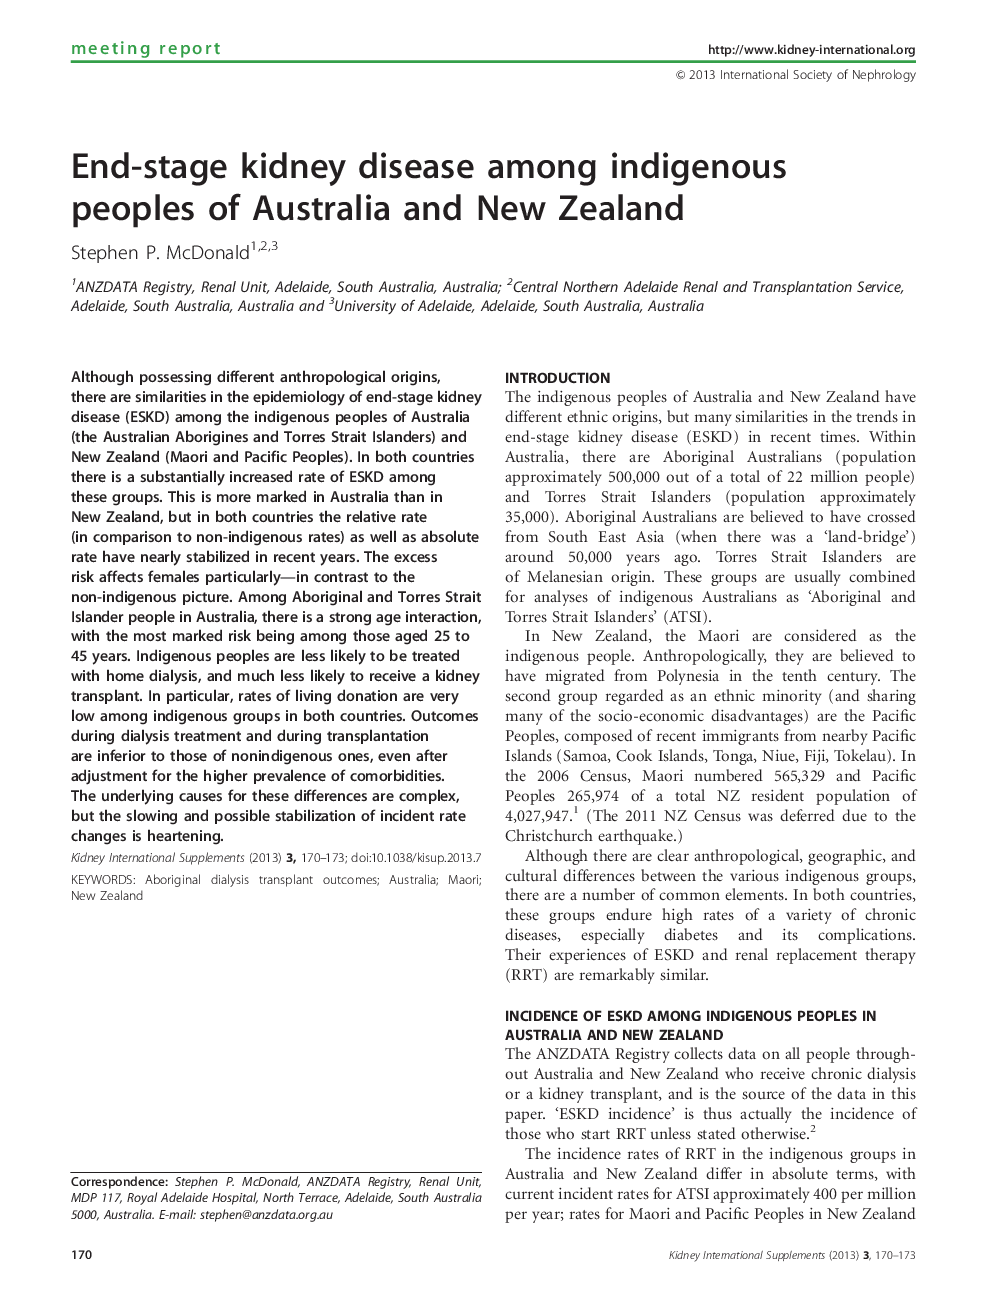 End-stage kidney disease among indigenous peoples of Australia and New Zealand 